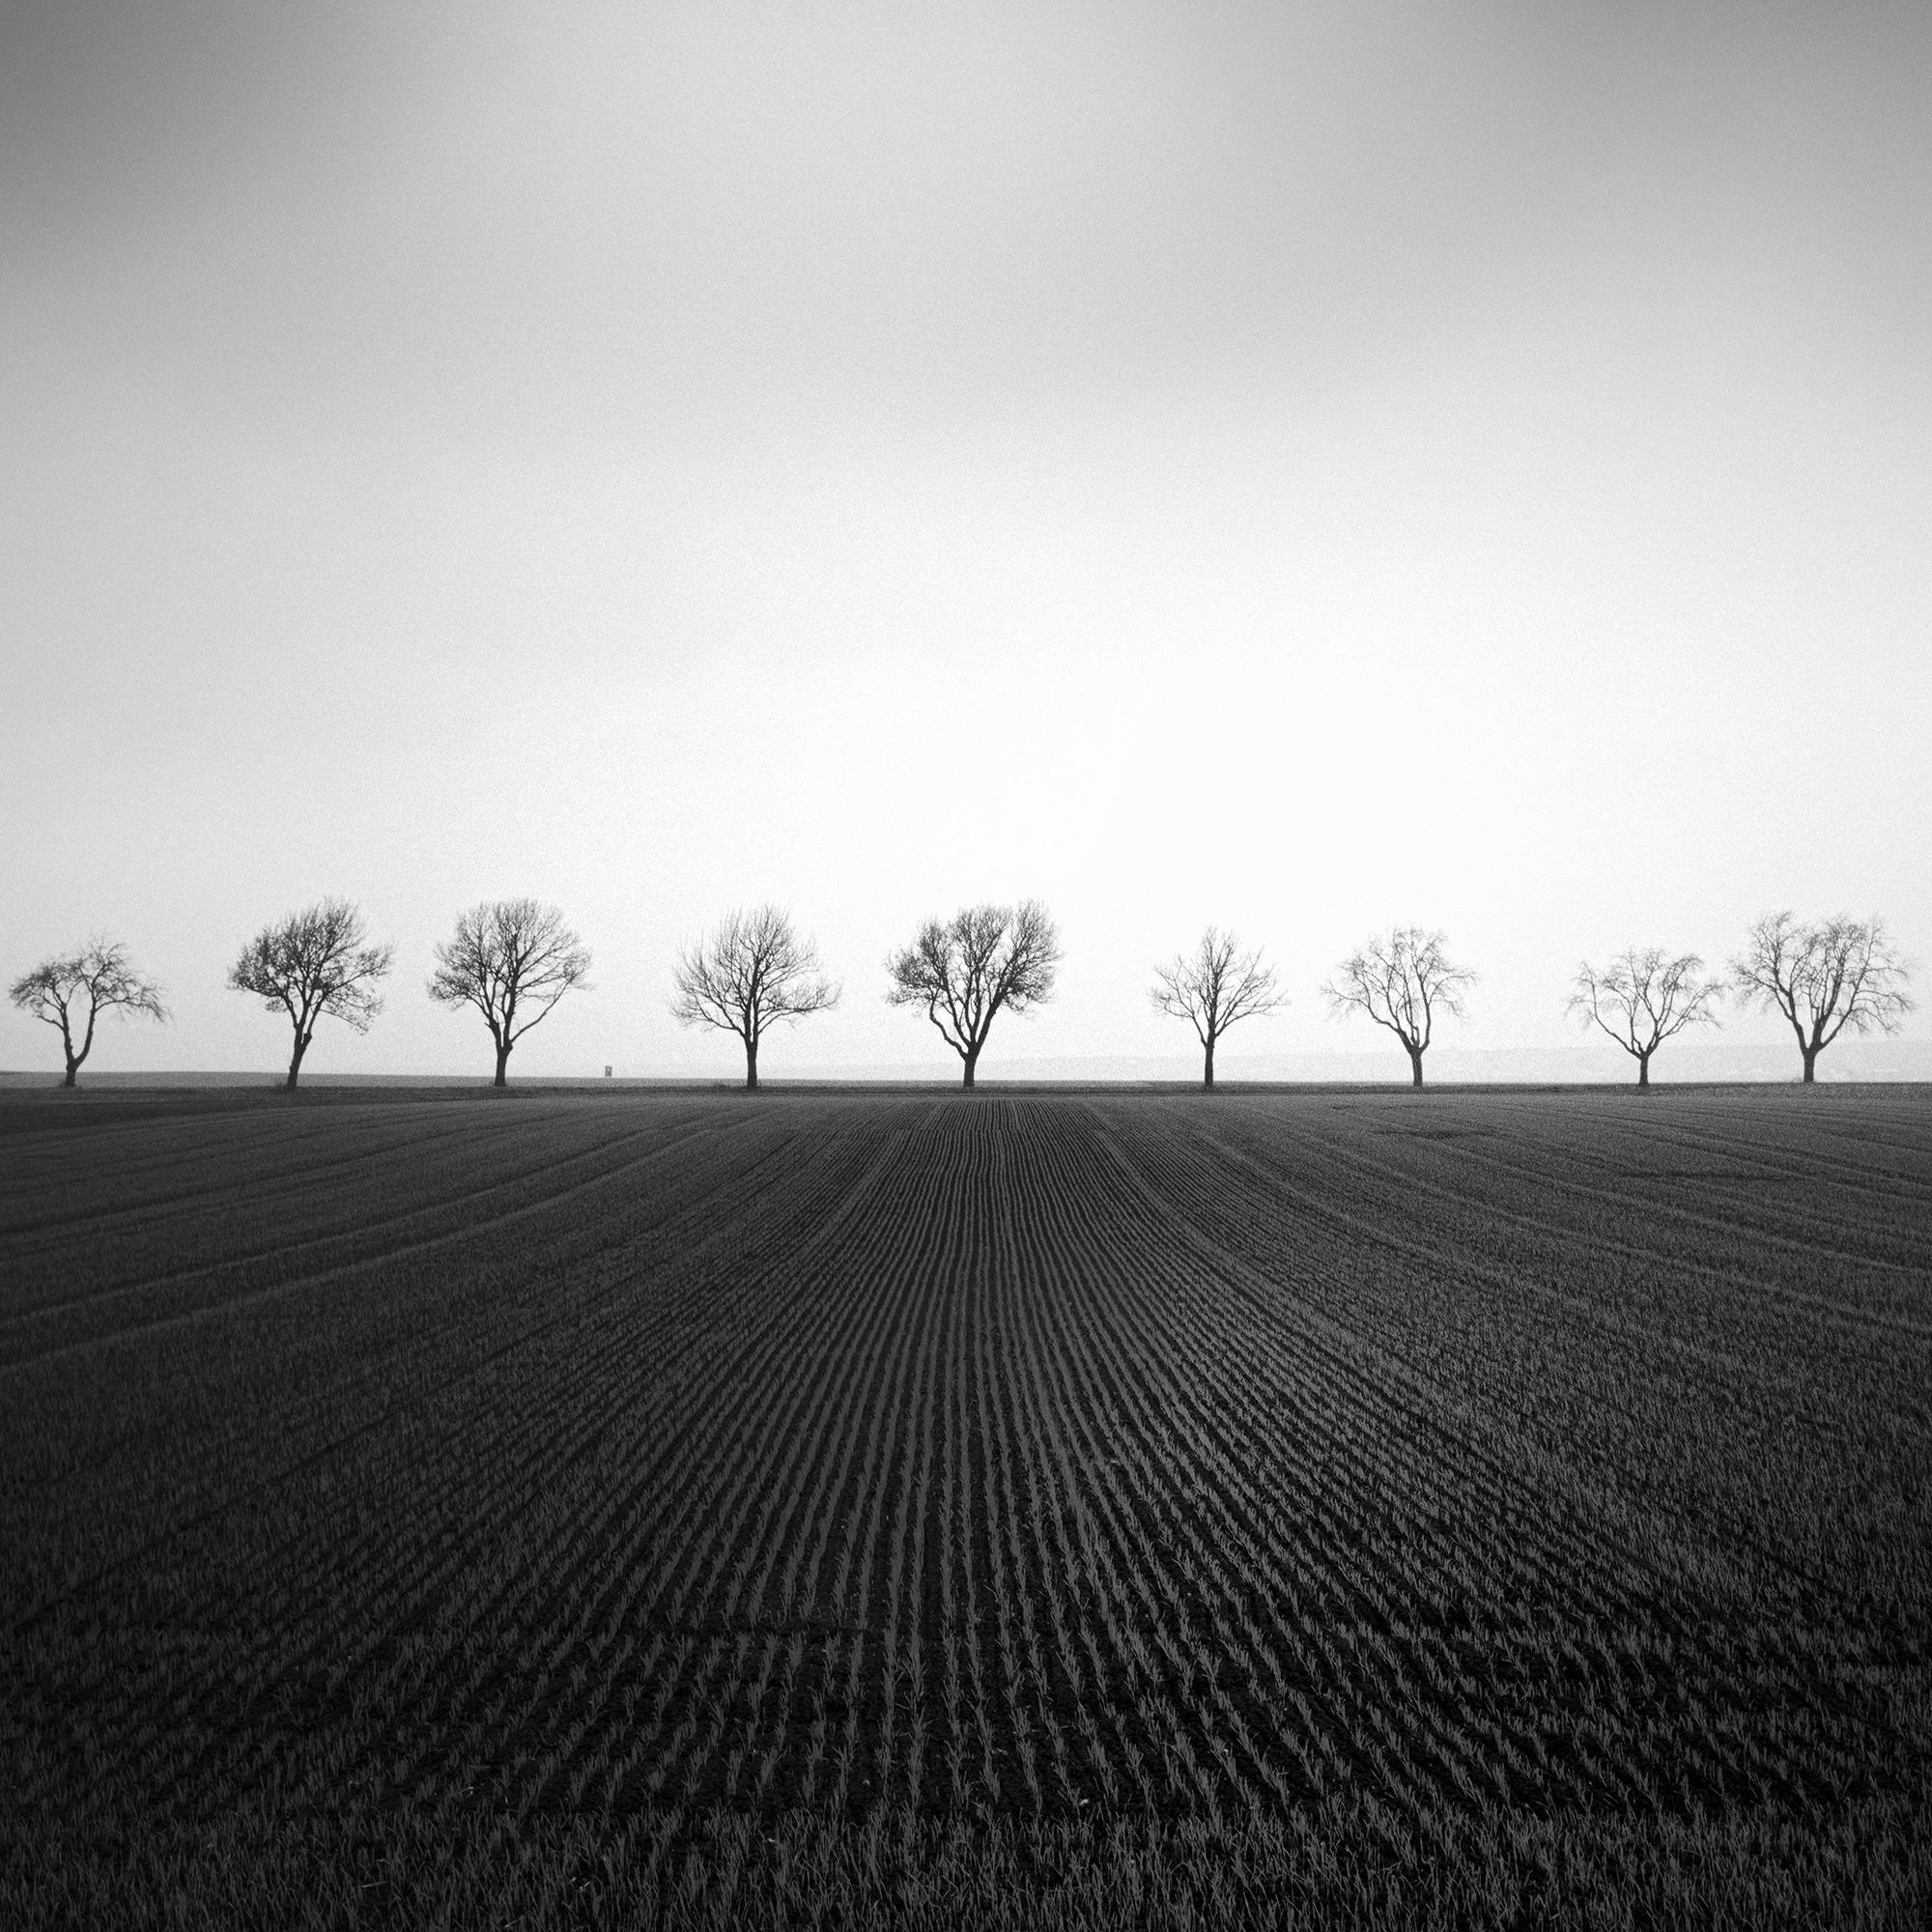 Black and white fine art landscape photography. Archival pigment ink print, limited edition of 9. Cherry tree avenue at the edge of the field in stormy weather, Weinviertel, Austria. 
All Gerald Berghammer prints are made to order in limited